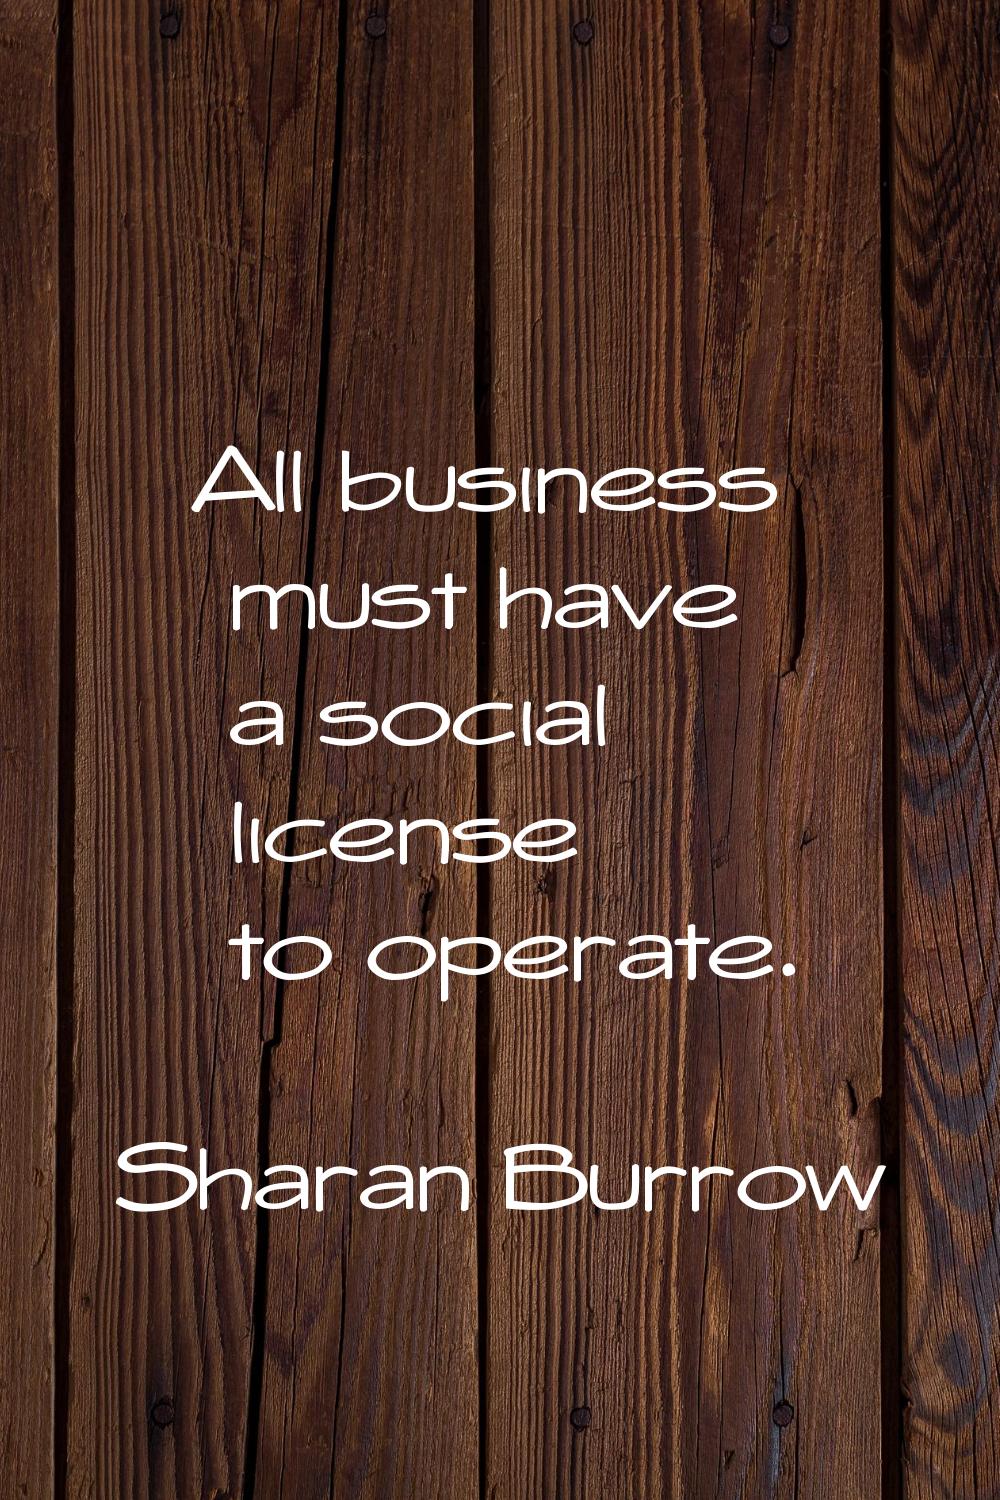 All business must have a social license to operate.